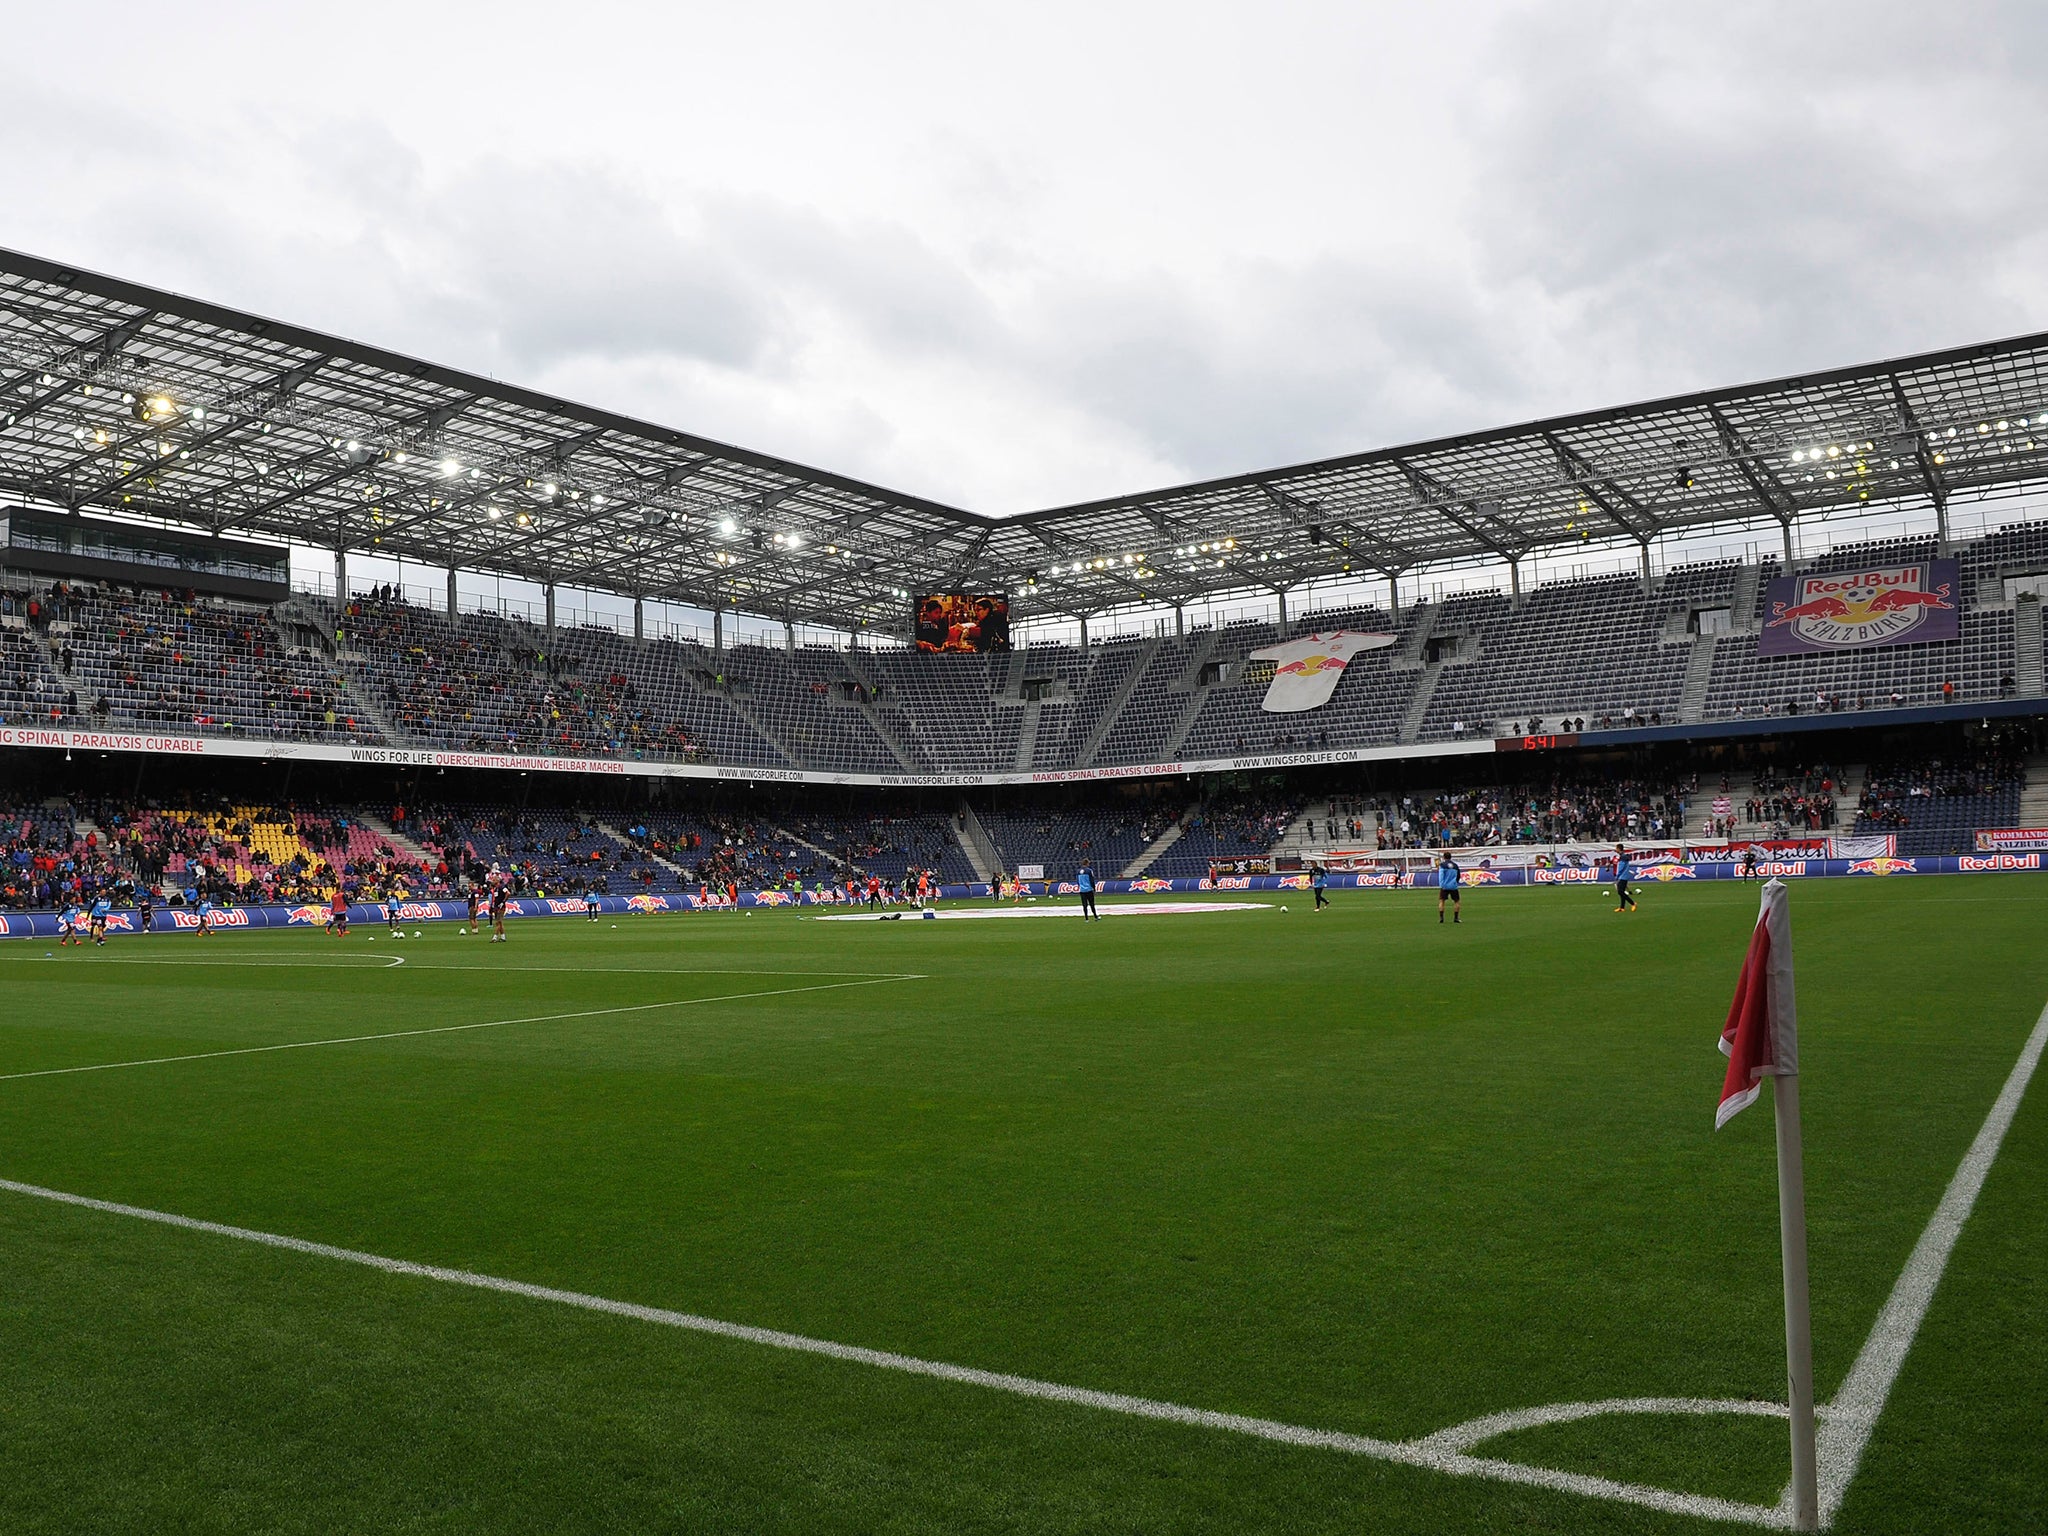 General view of the Red Bull Arena, home of FC Salzburg